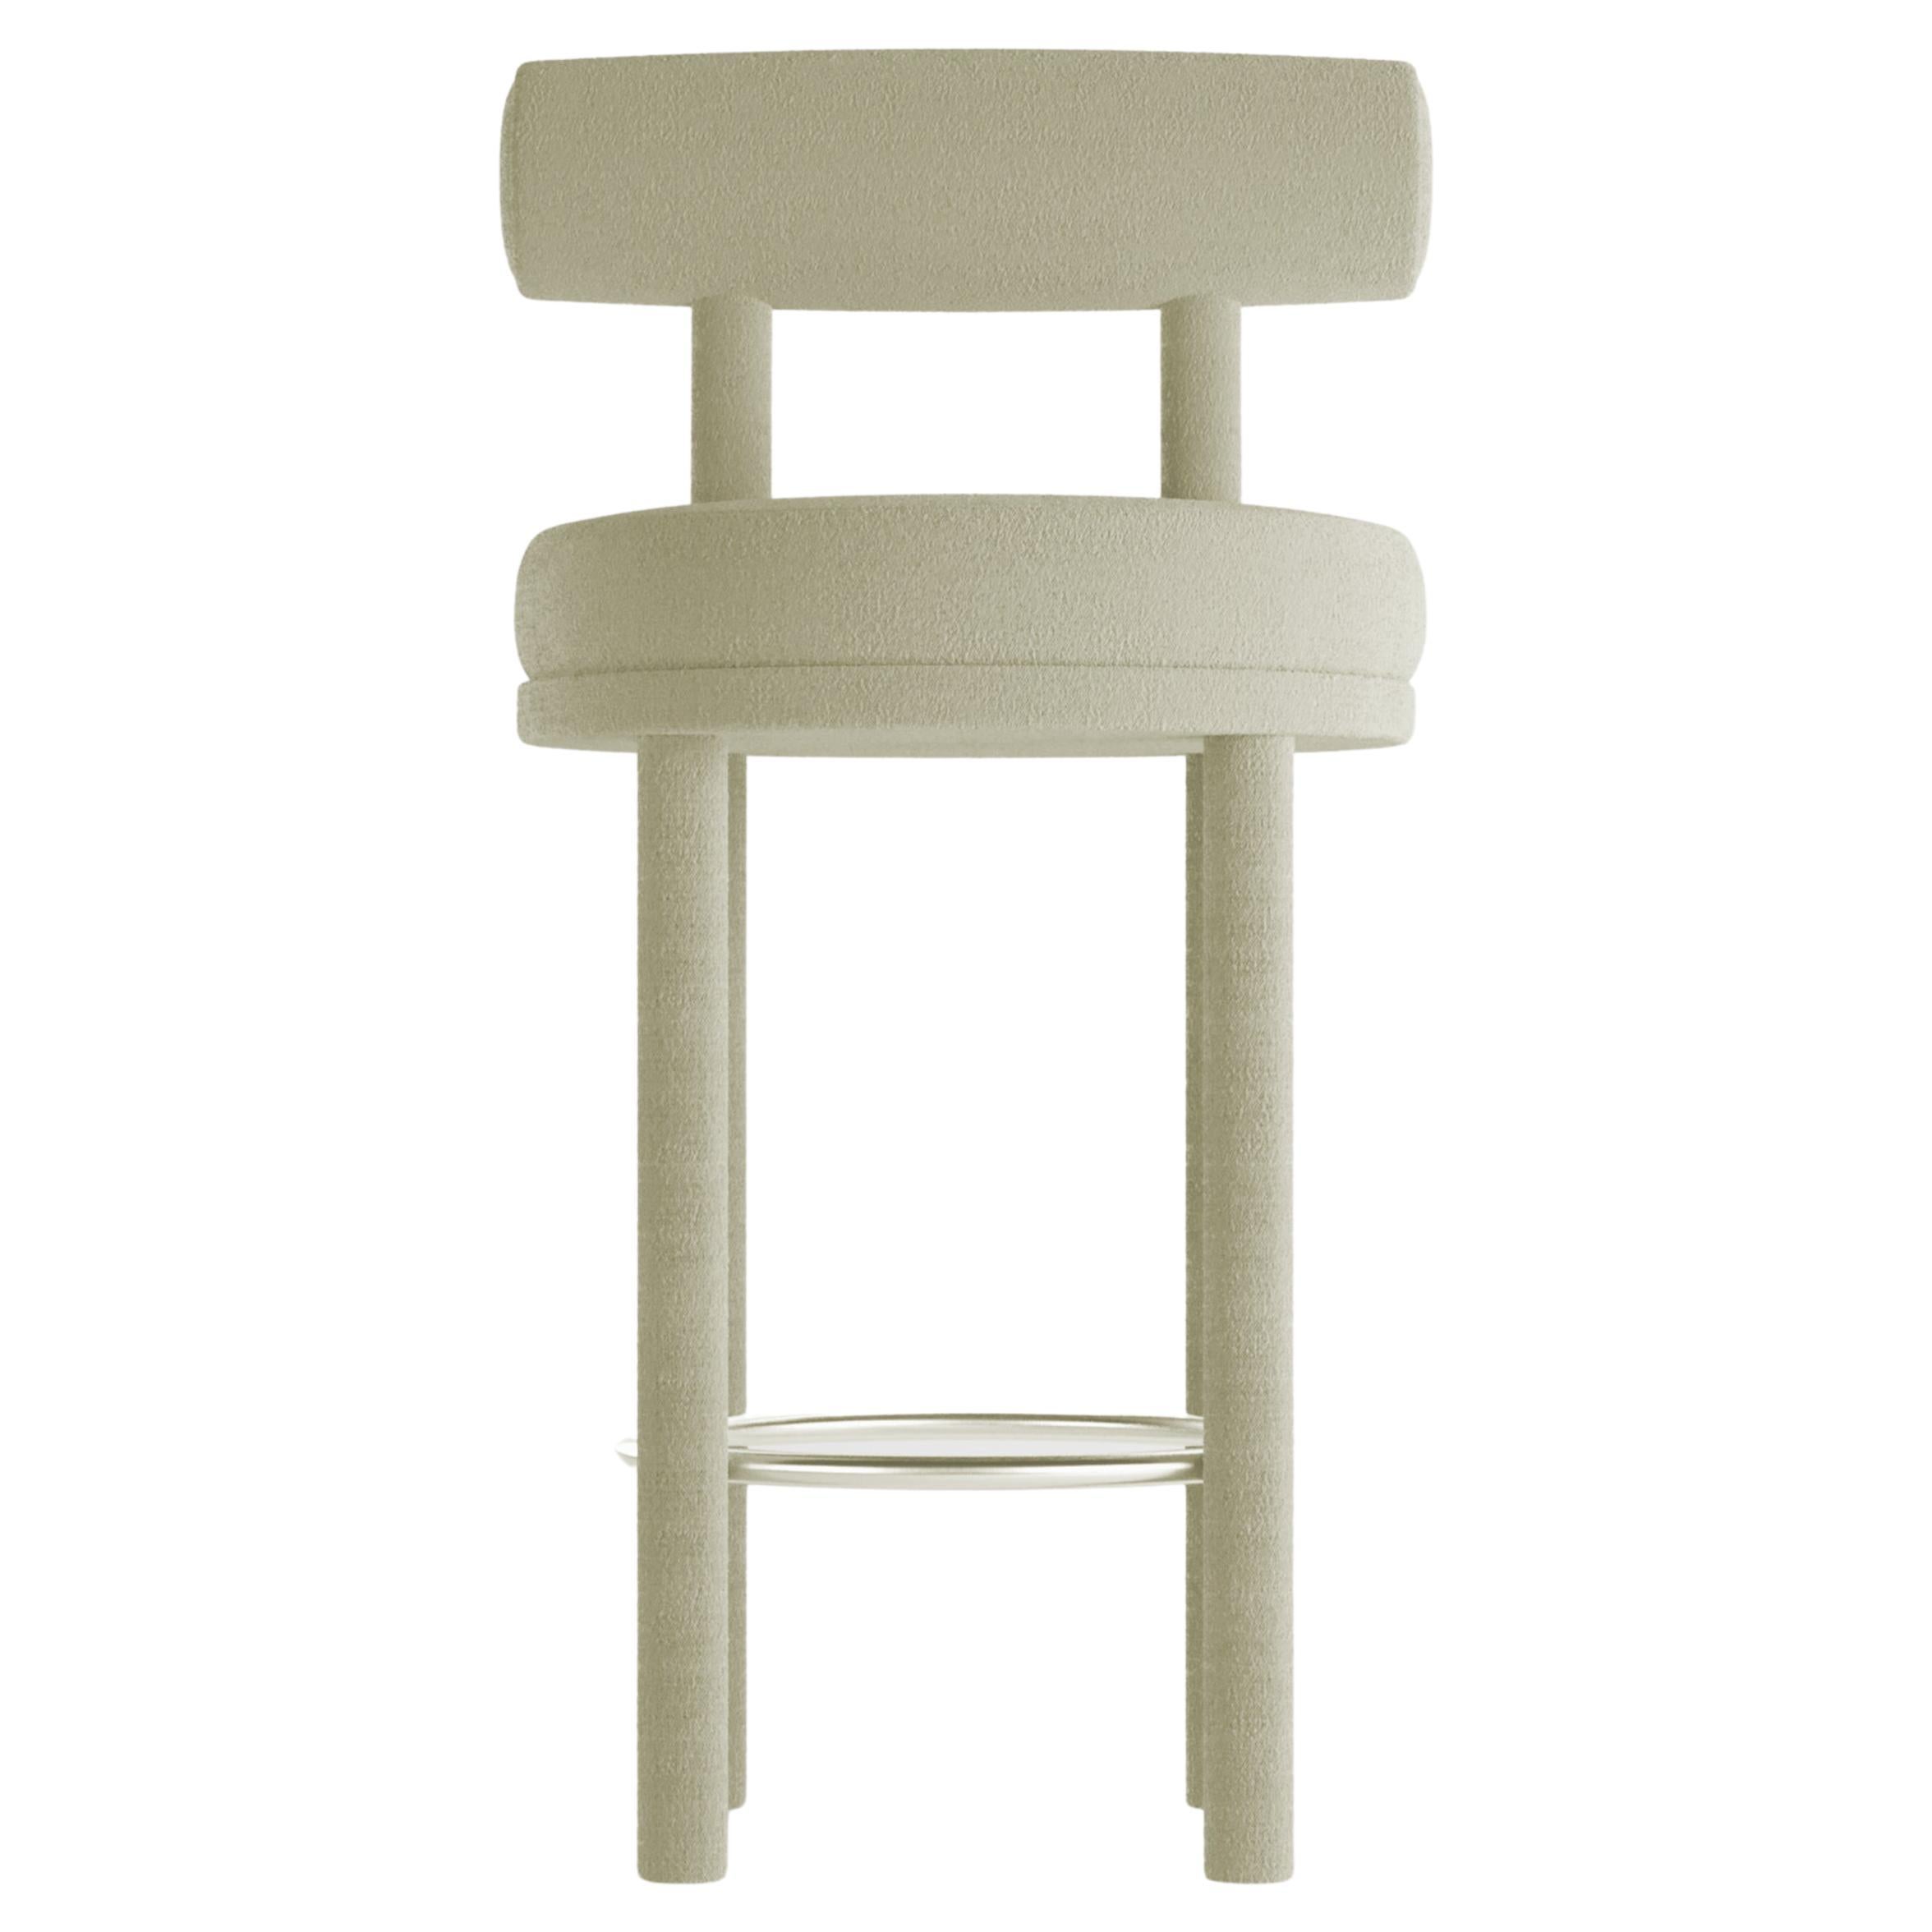 Collector Contemporary Modern Moca Bar Chair in Bouclé Beige by Studio Rig